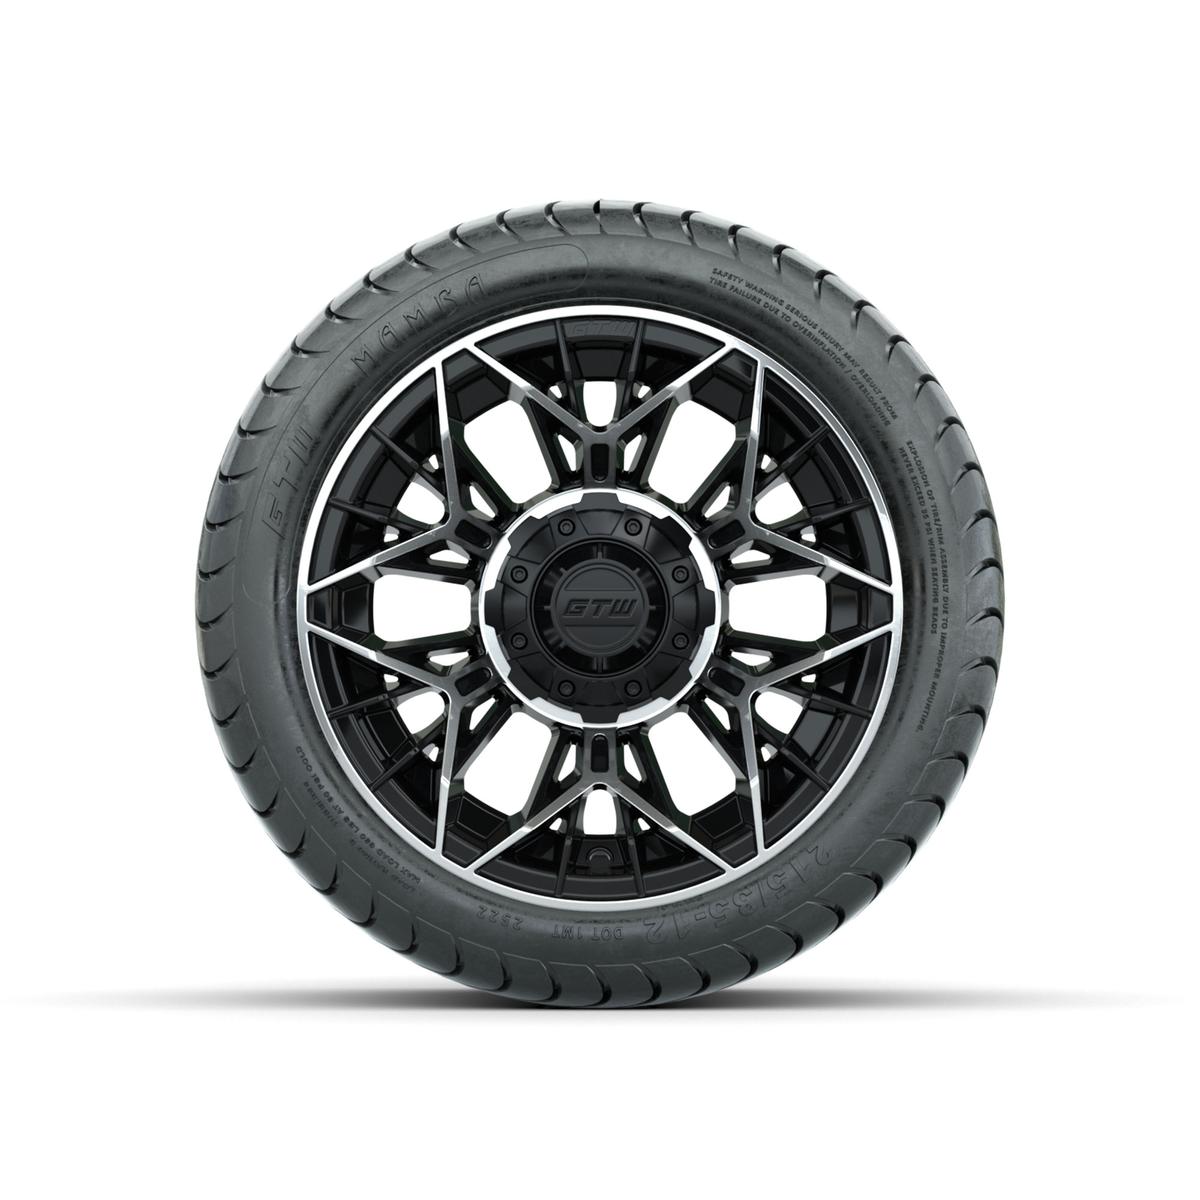 Set of (4) 12 in GTW® Stellar Machined & Black Wheels with 215/35-12 Mamba Street Tires